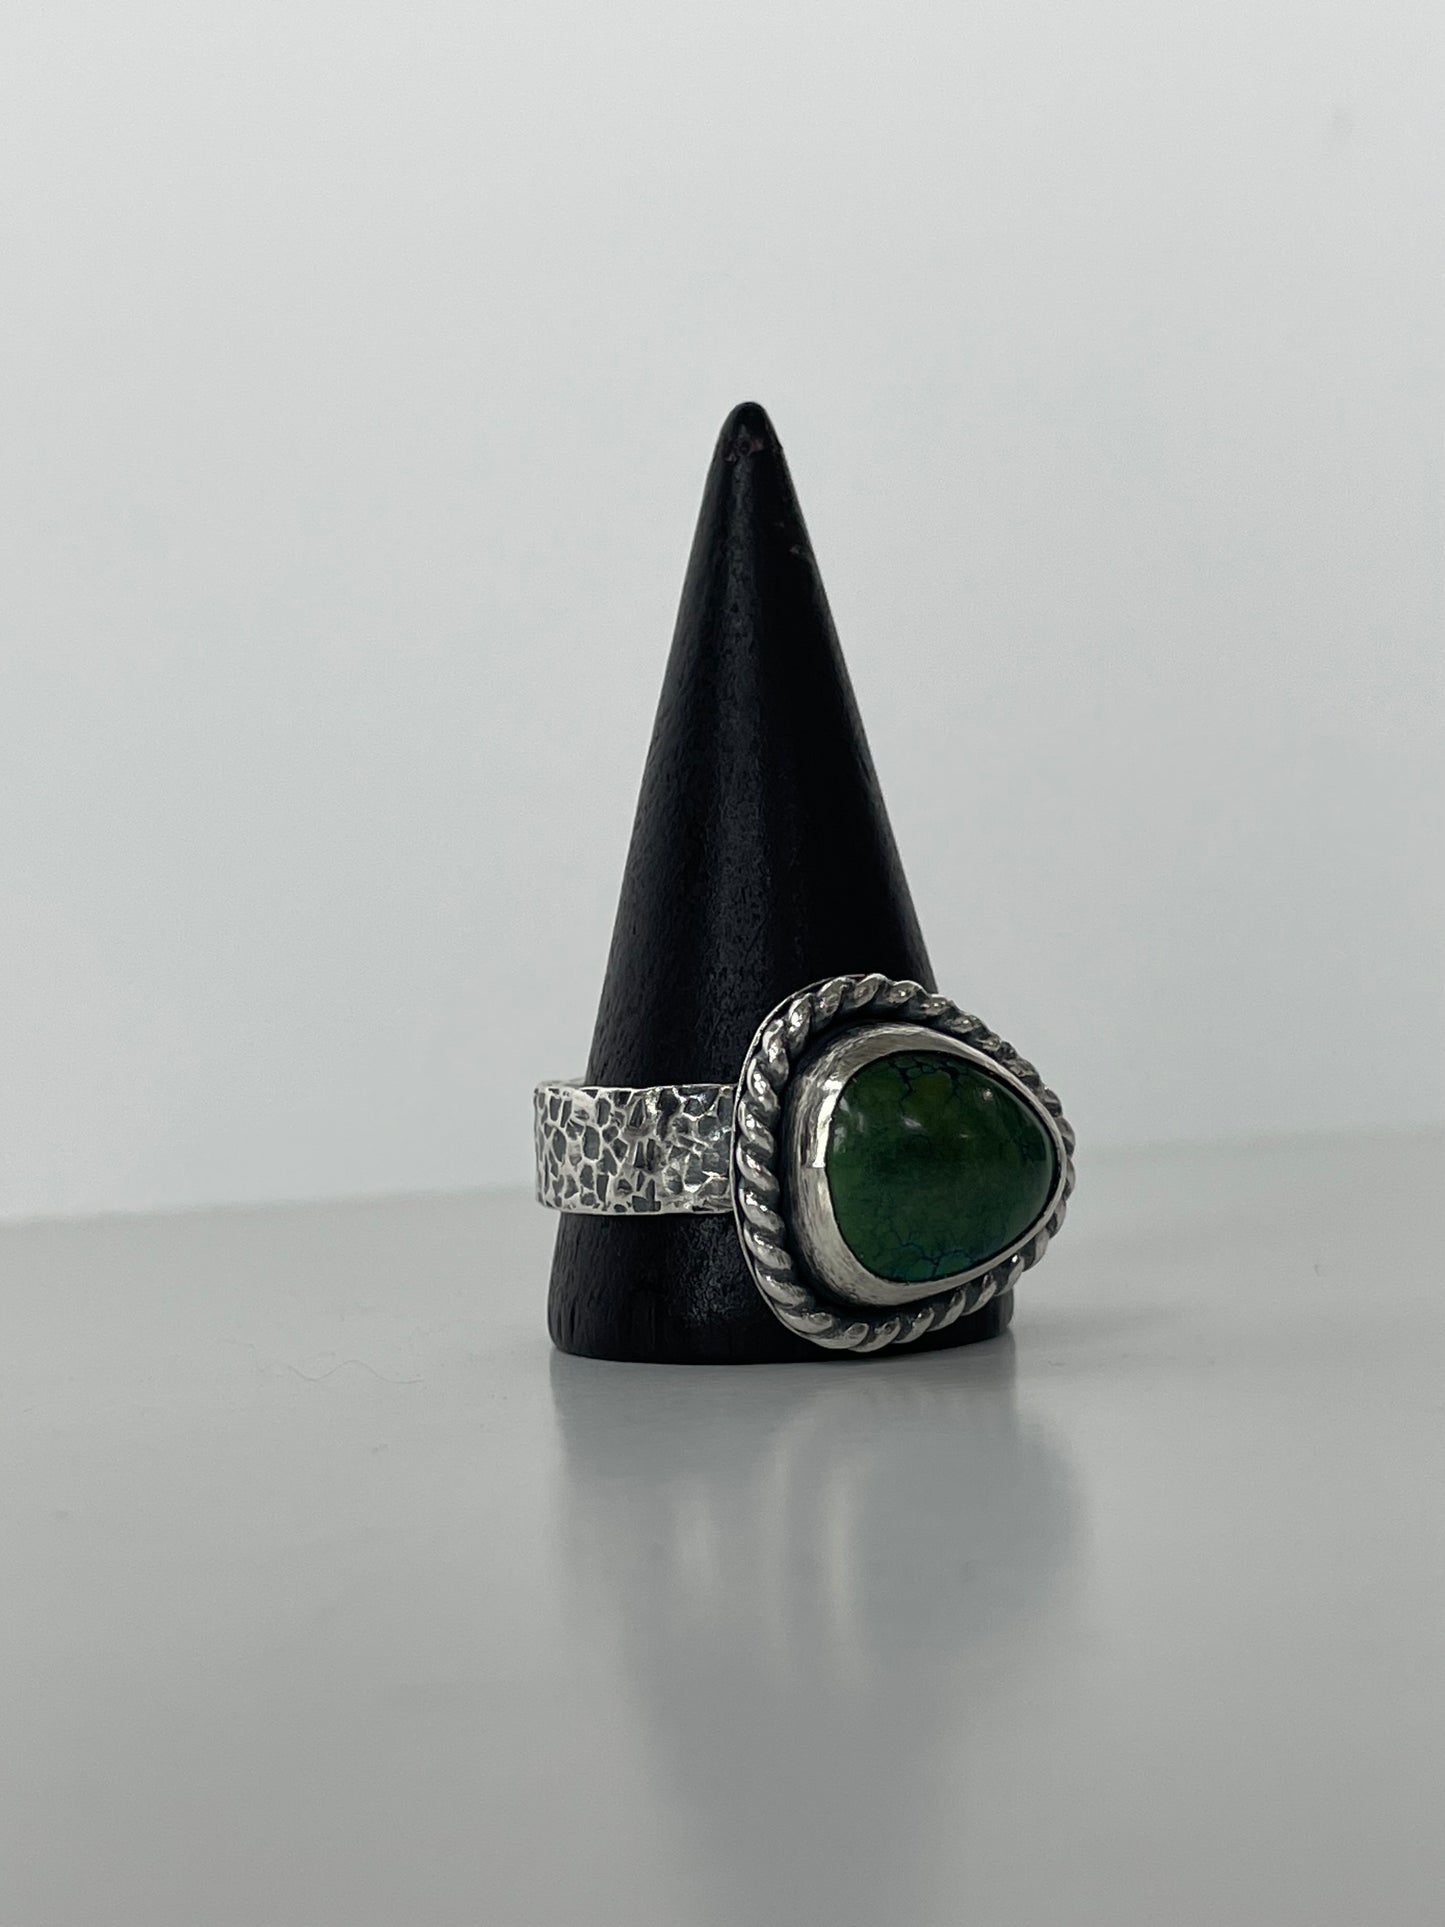 Turquoise and Sterling Ring - US 13